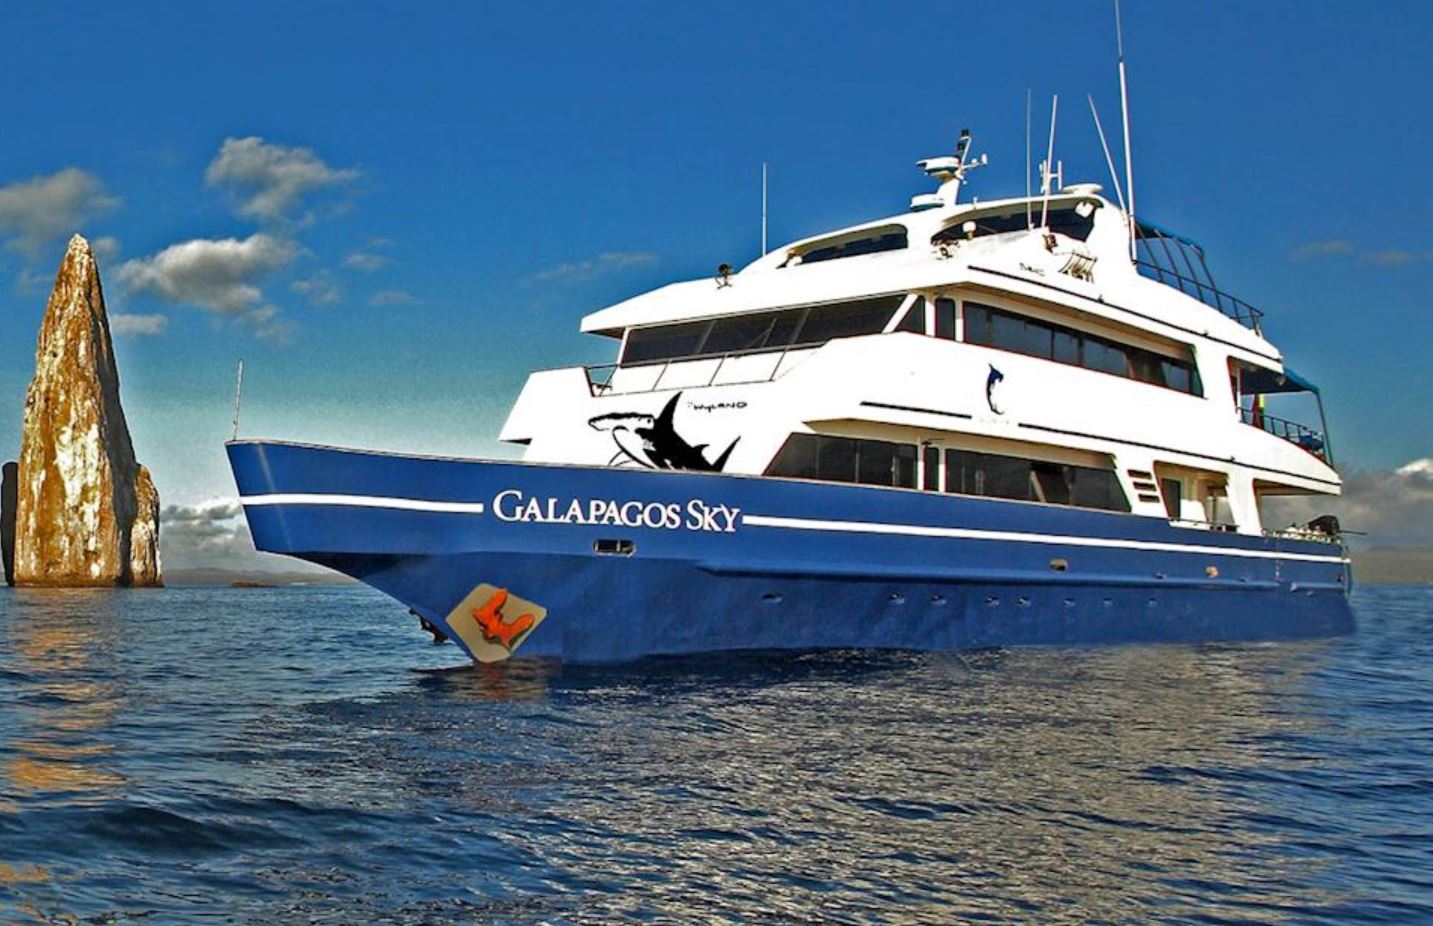 Galapagos Sky diving Expedition Yacht: Galapagos Sky Tauch-Expeditions Yacht 8 Tage/ Nächte Tauchkreuzfahrt mit Wolf & Darwin Insel  (18 dives)